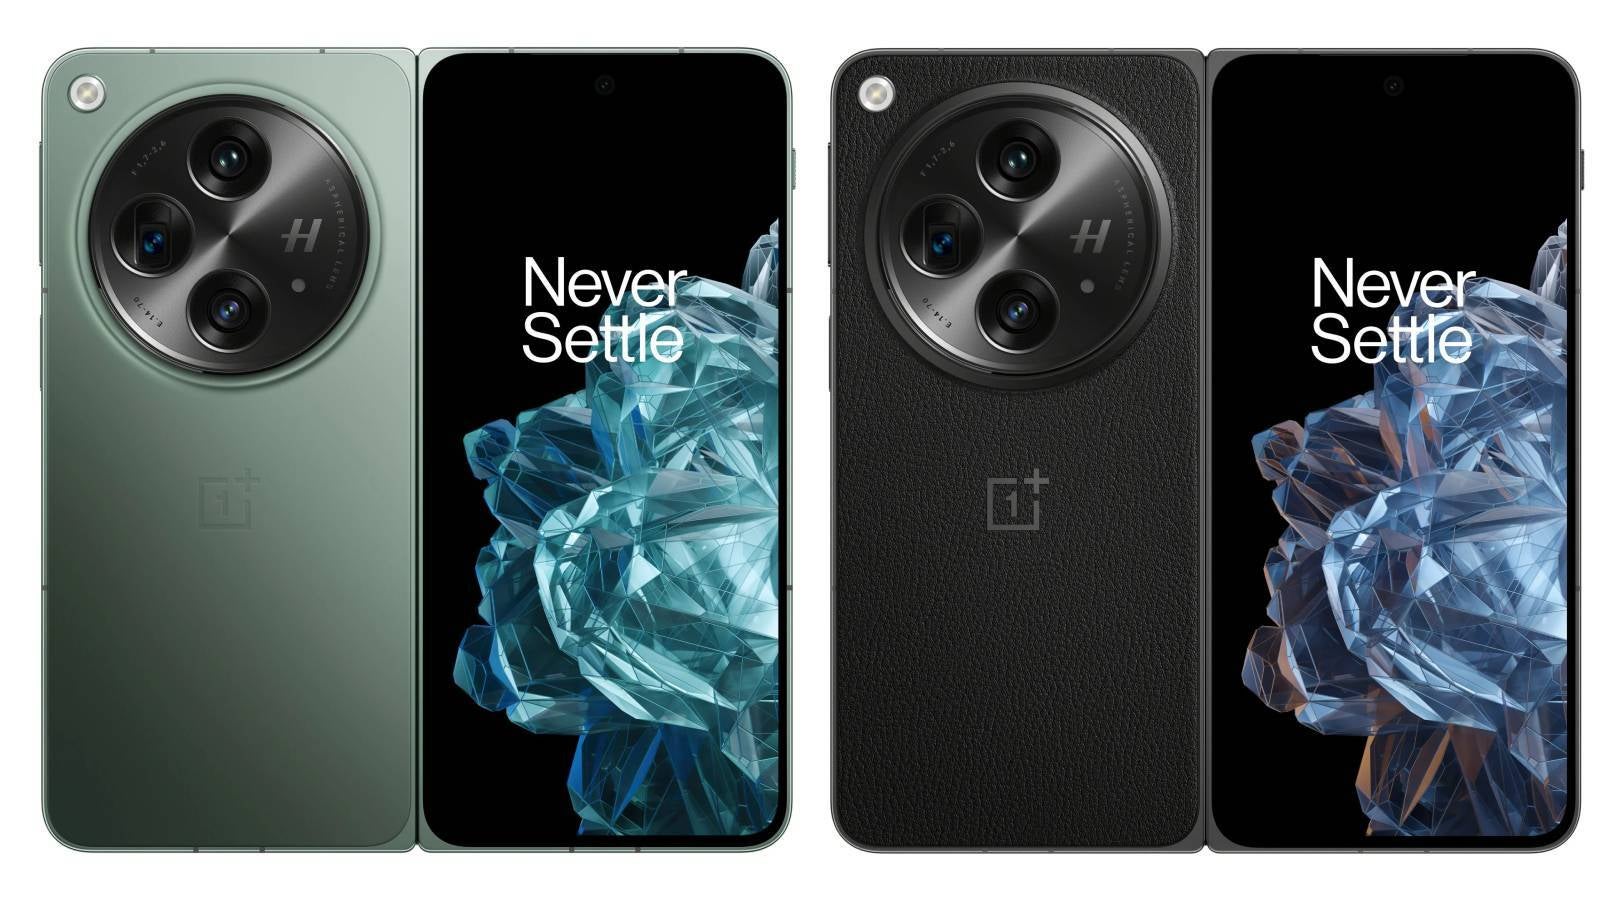 OnePlus Open leaked marketing images - Leaked pricing reveals OnePlus Open will be the most affordable book-style foldable in US